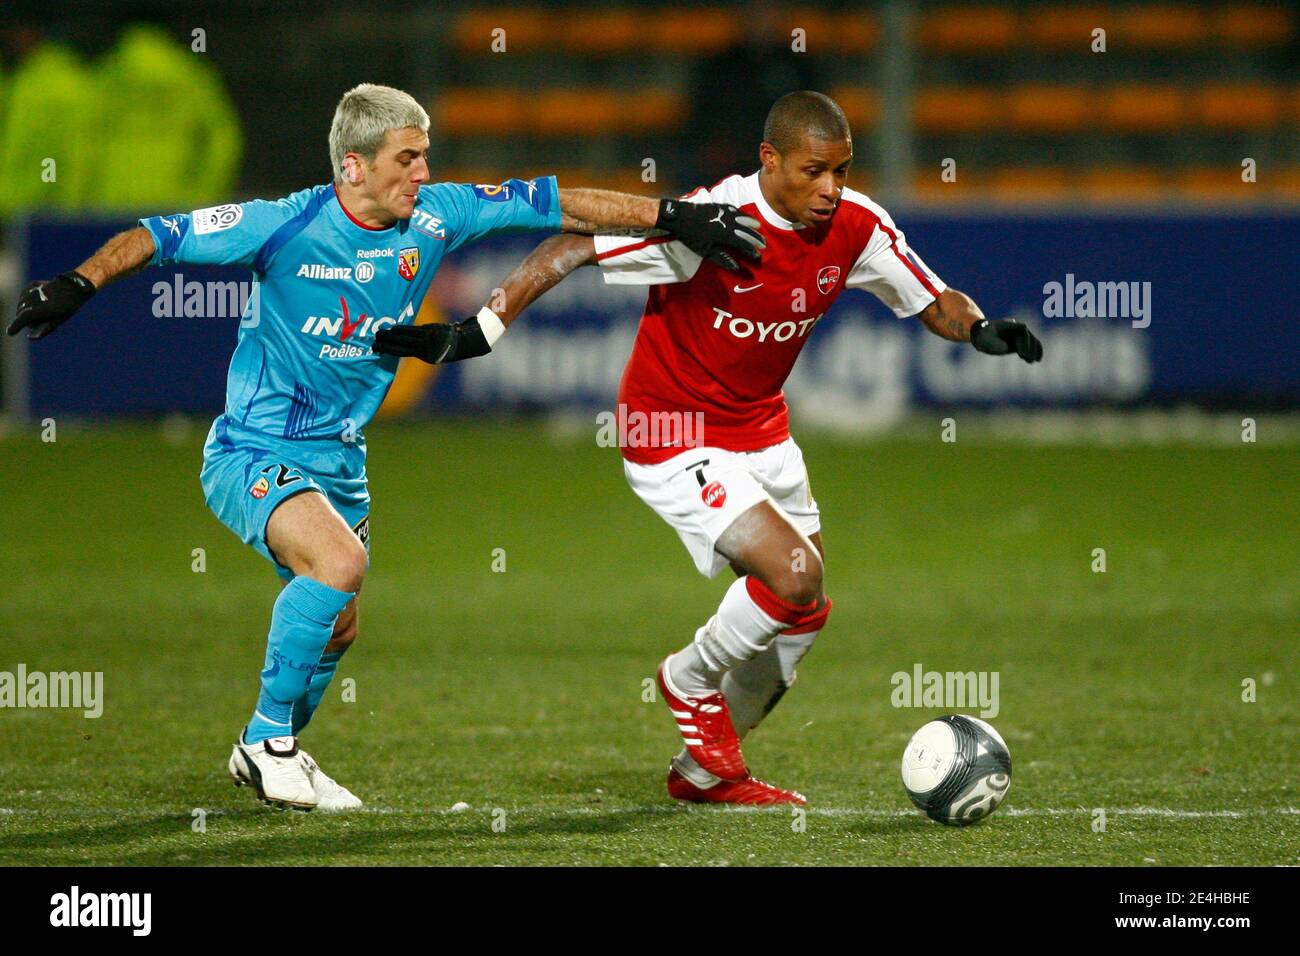 Valenciennes' Johan Audel fights for the ball with Lens' Yohan Demont  during the french first league soccer match between Valenciennes FC (VAFC)  and Racing Club de Lens (RCL) at Nungesser Stadium in